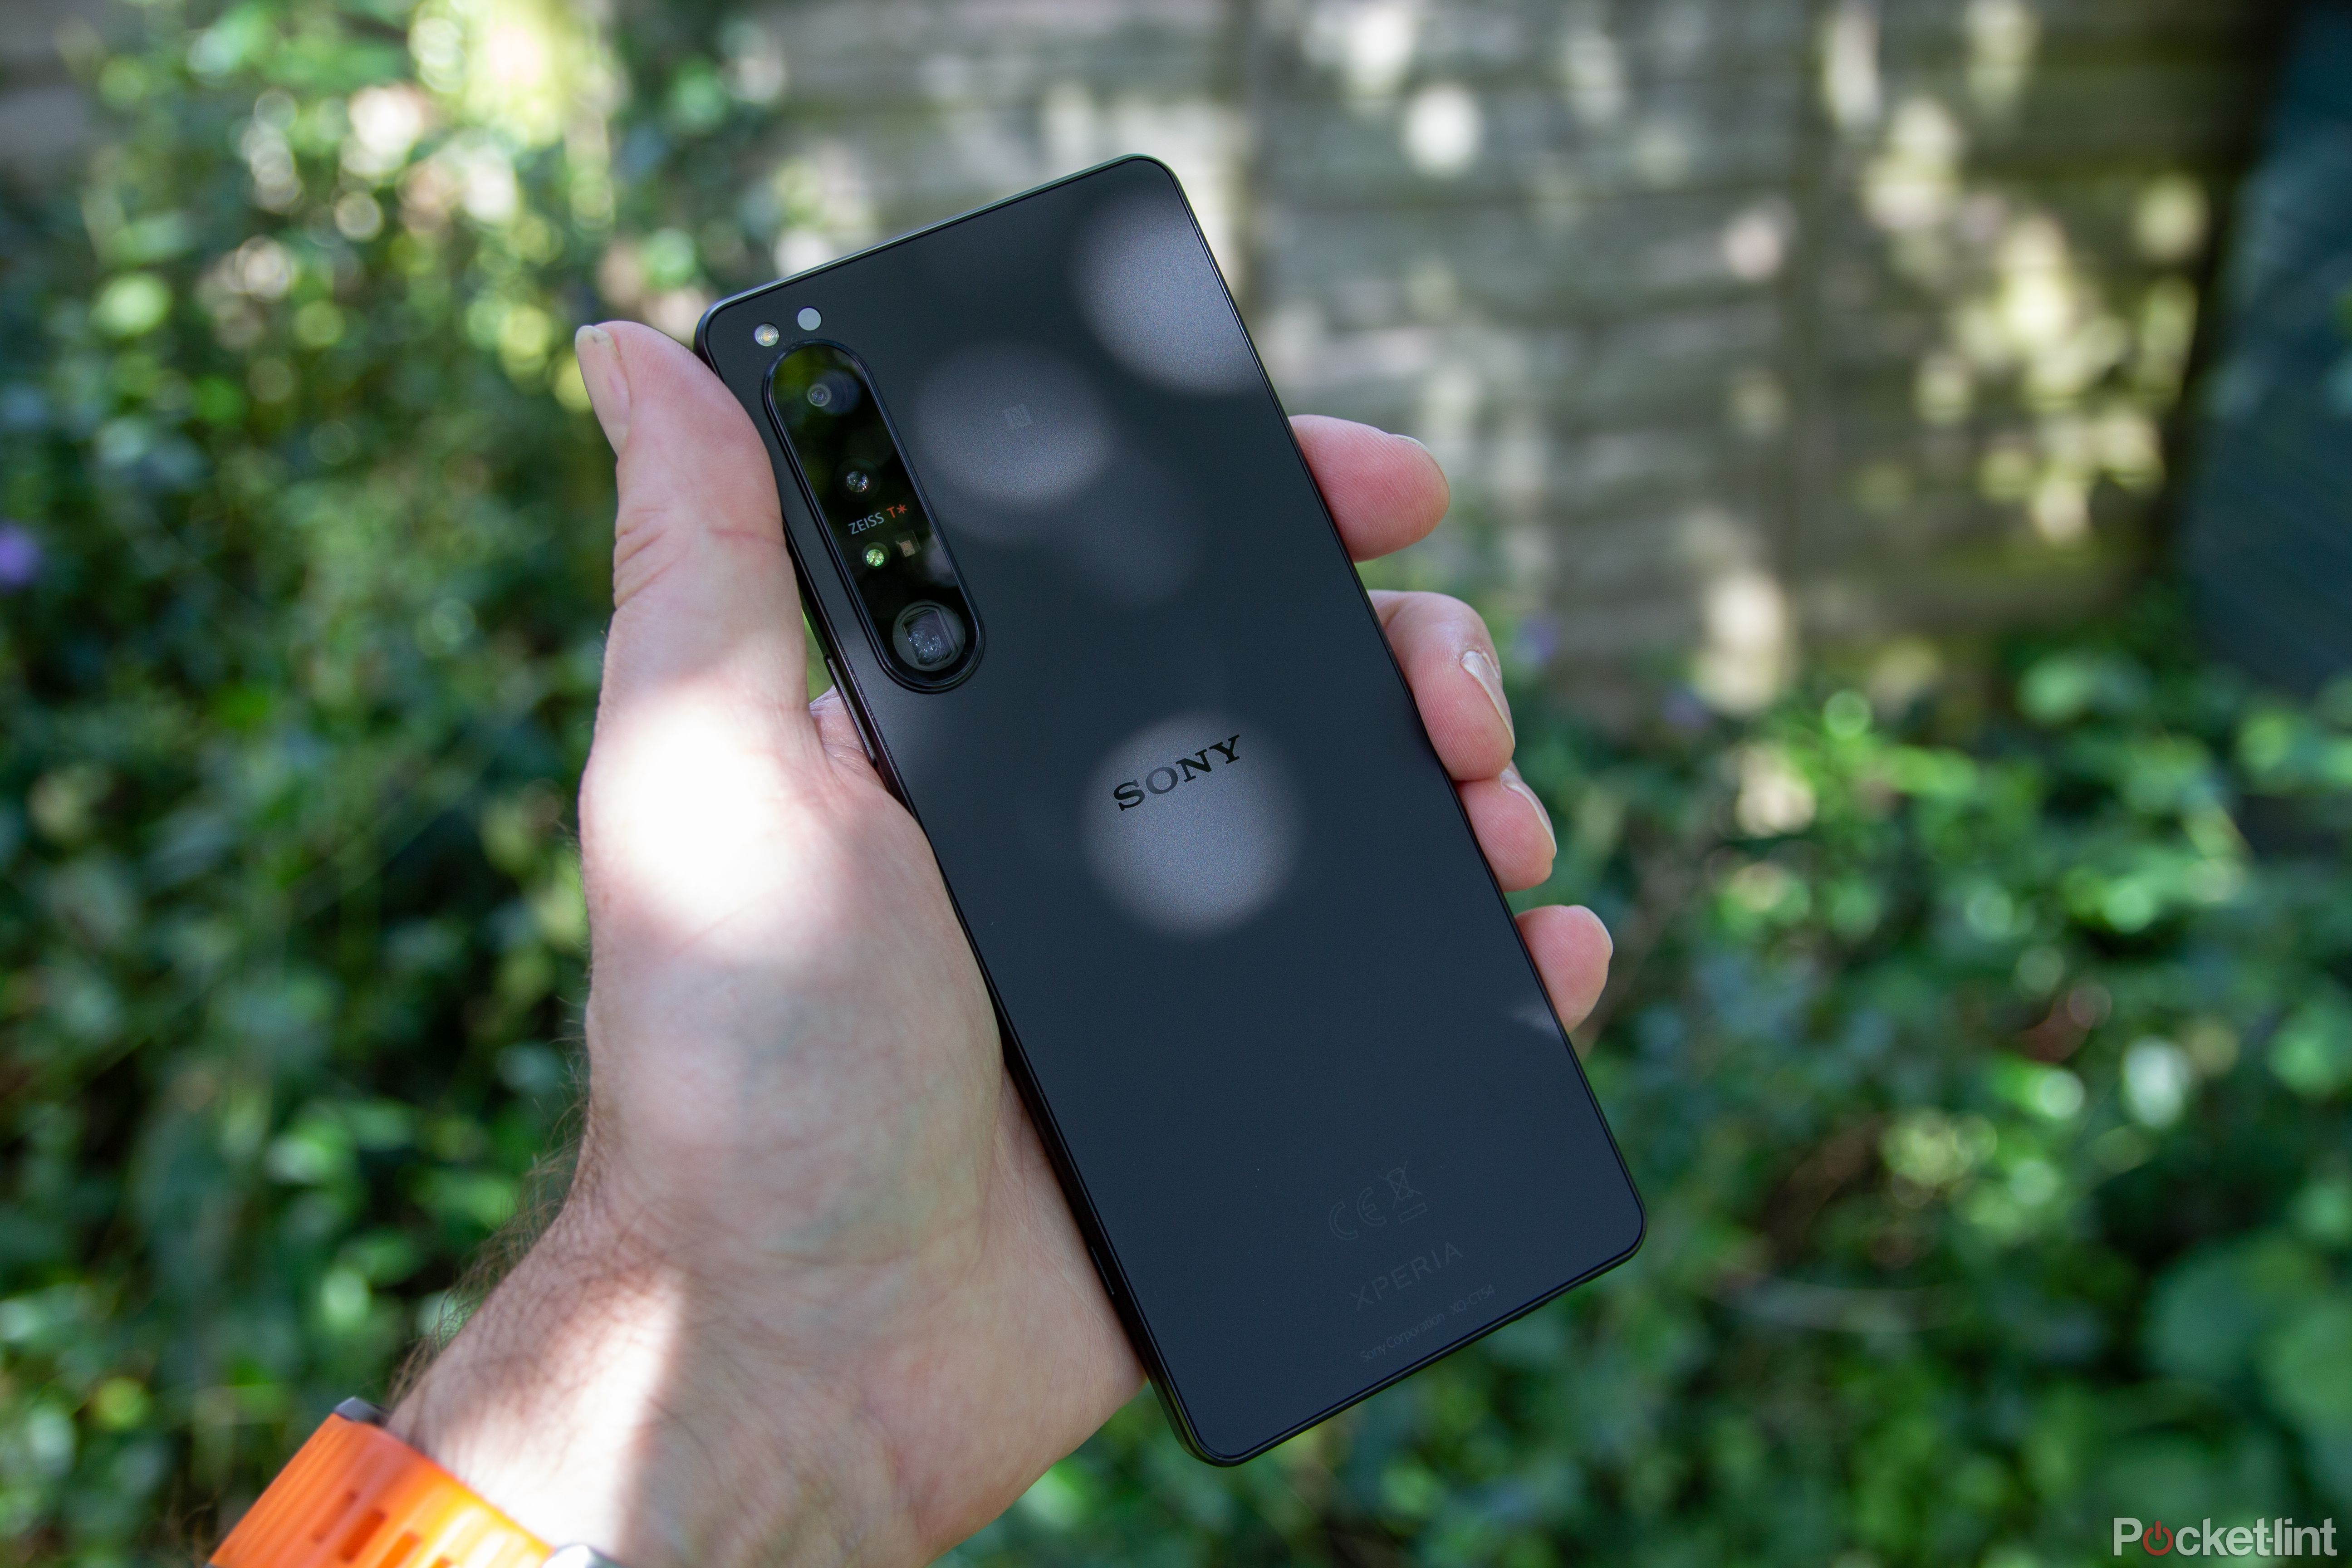 Sony Xperia 1 V event: How to watch it and what to expect